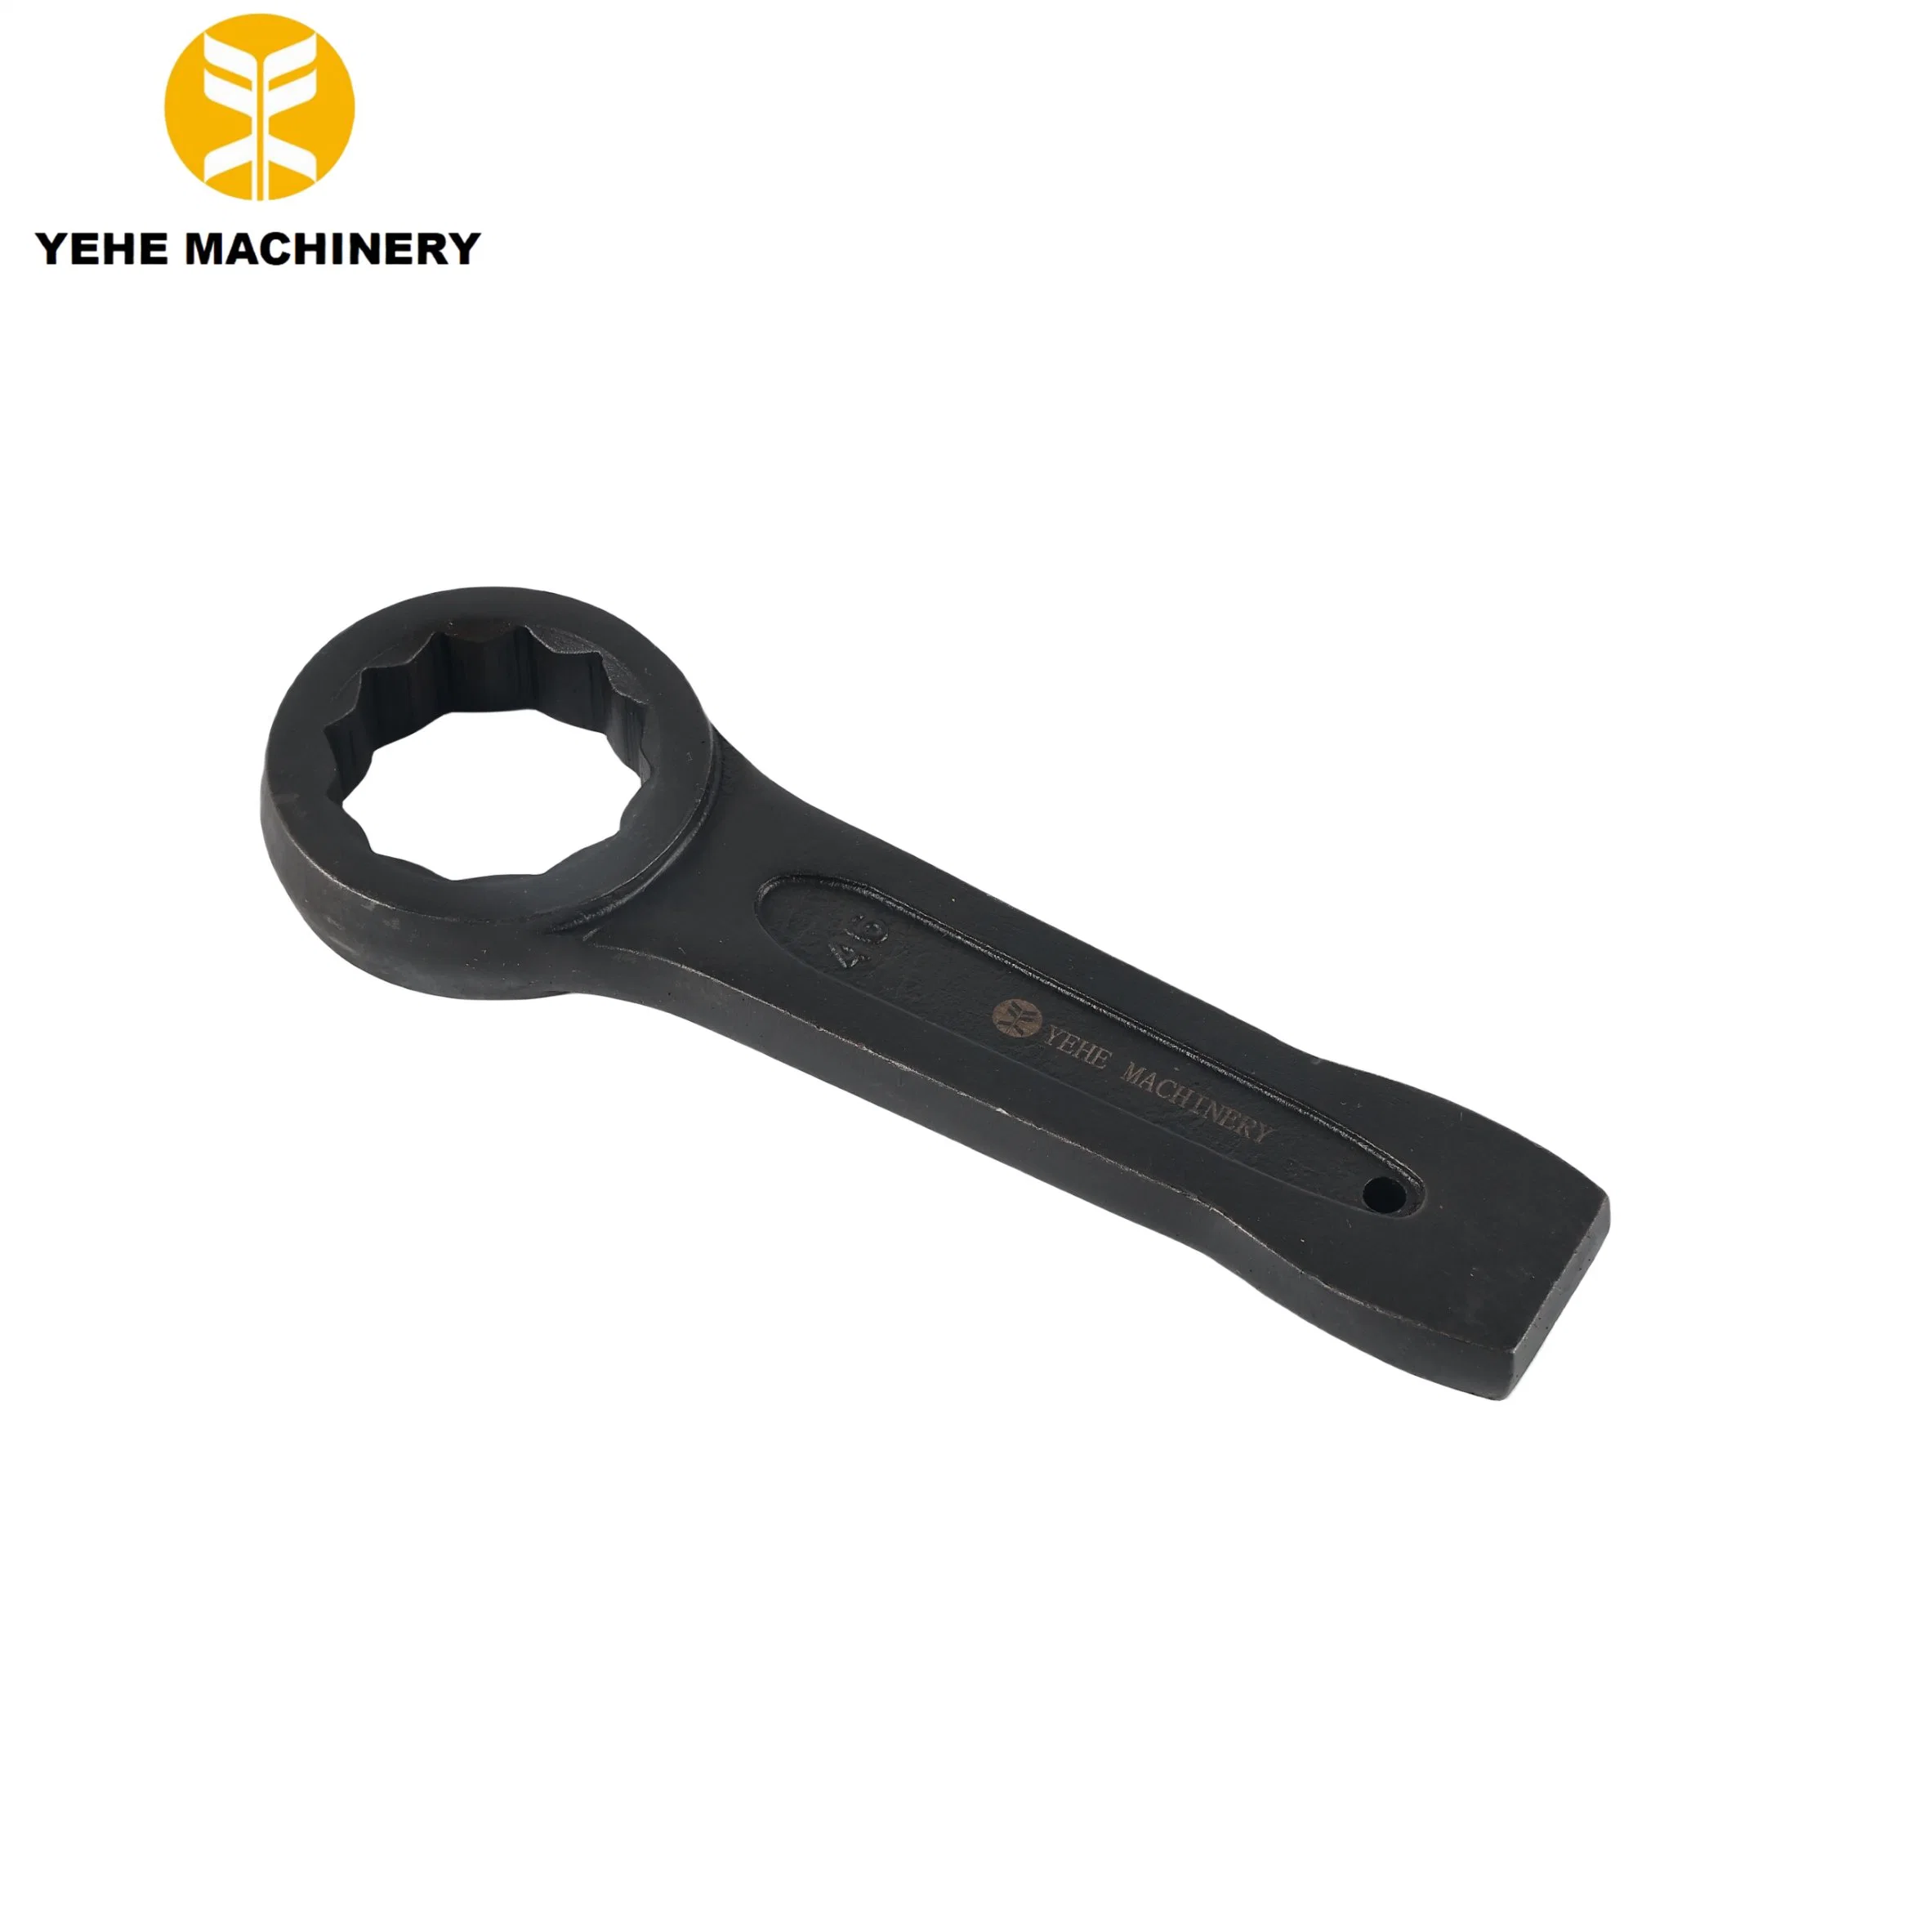 6-36mm Chrome Vanadium Wrench Spanner Combination Multi Wrench Spanner Handle Tools for Auto Body Repair Tools